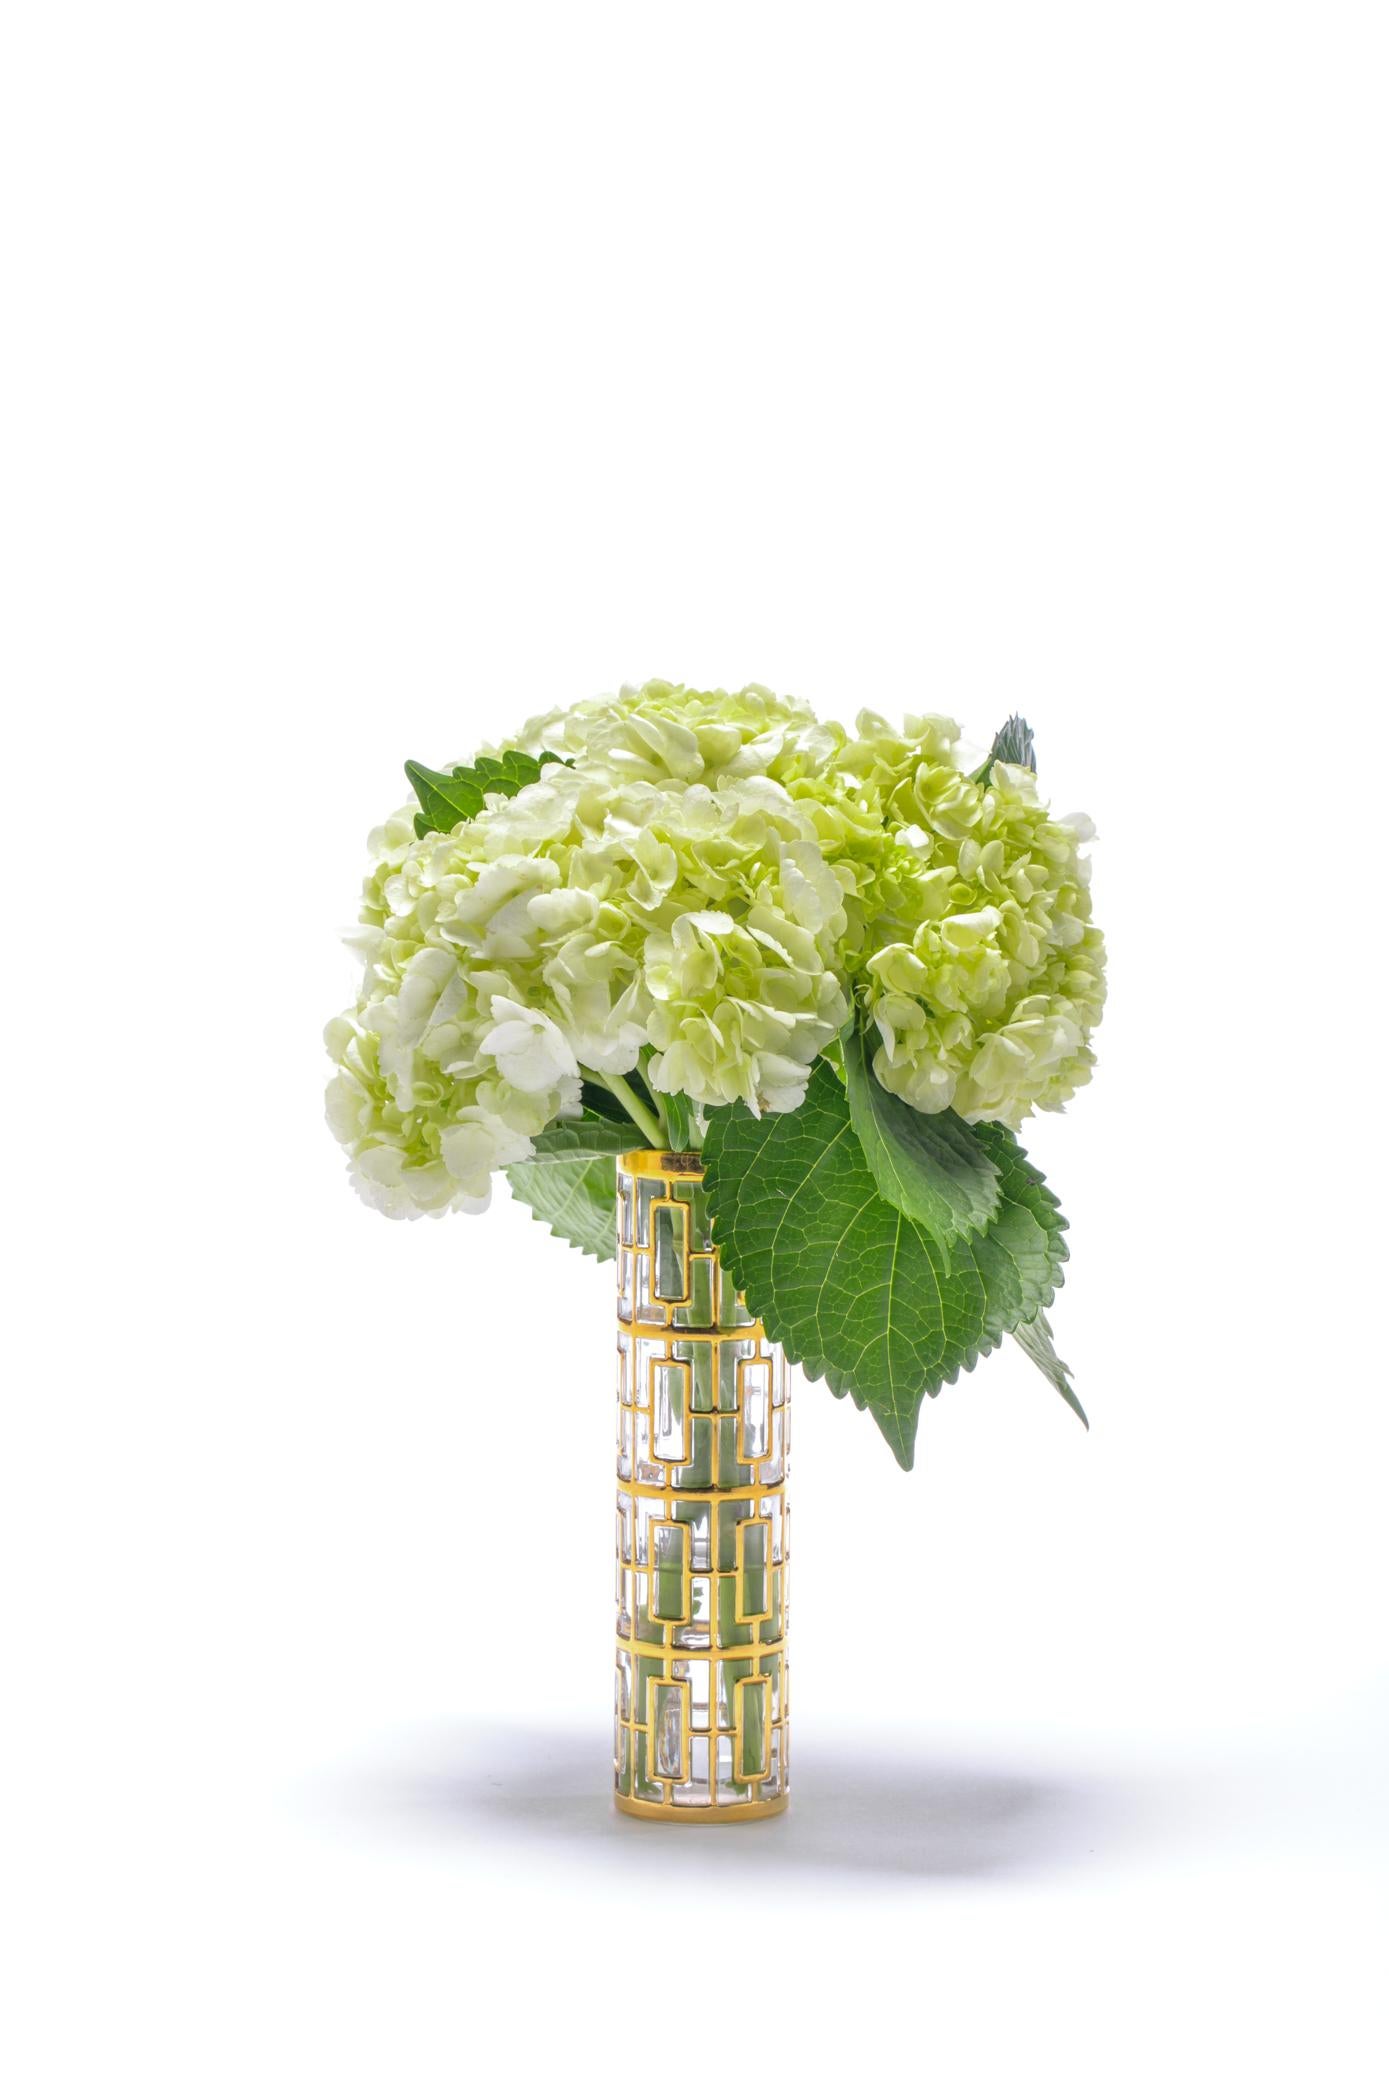 Delivering high style and sophistication since the 60s, this unique and uplifting vase is of the one of the most celebrated Mid Century Modern glassware patterns of the time and into today. The best of times. Vintage top of the line chic. This vase